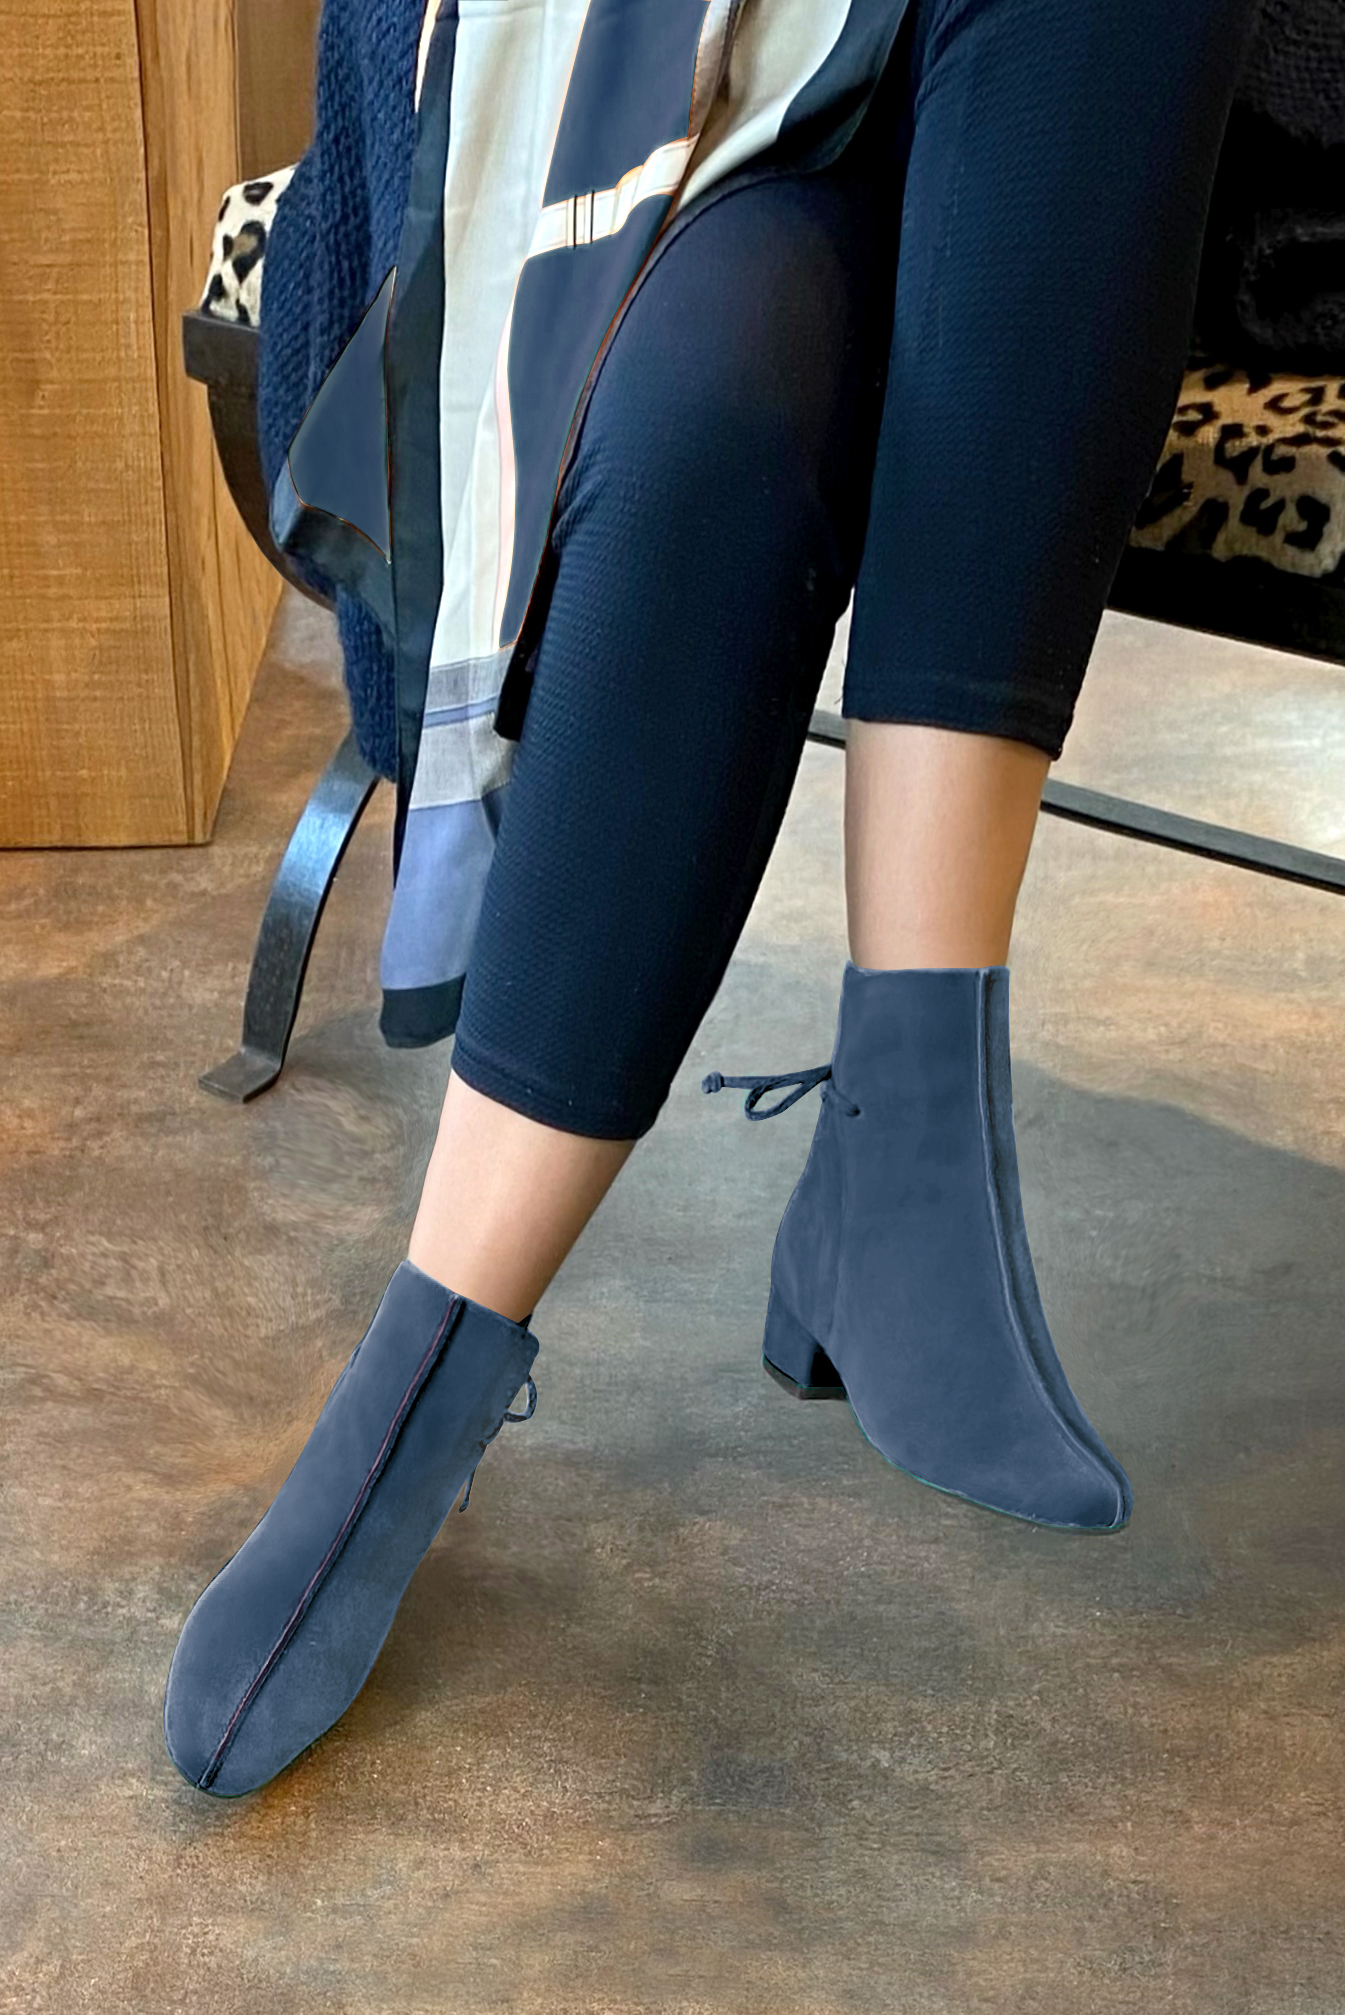 Denim blue women's ankle boots with laces at the back. Round toe. Low block heels. Worn view - Florence KOOIJMAN